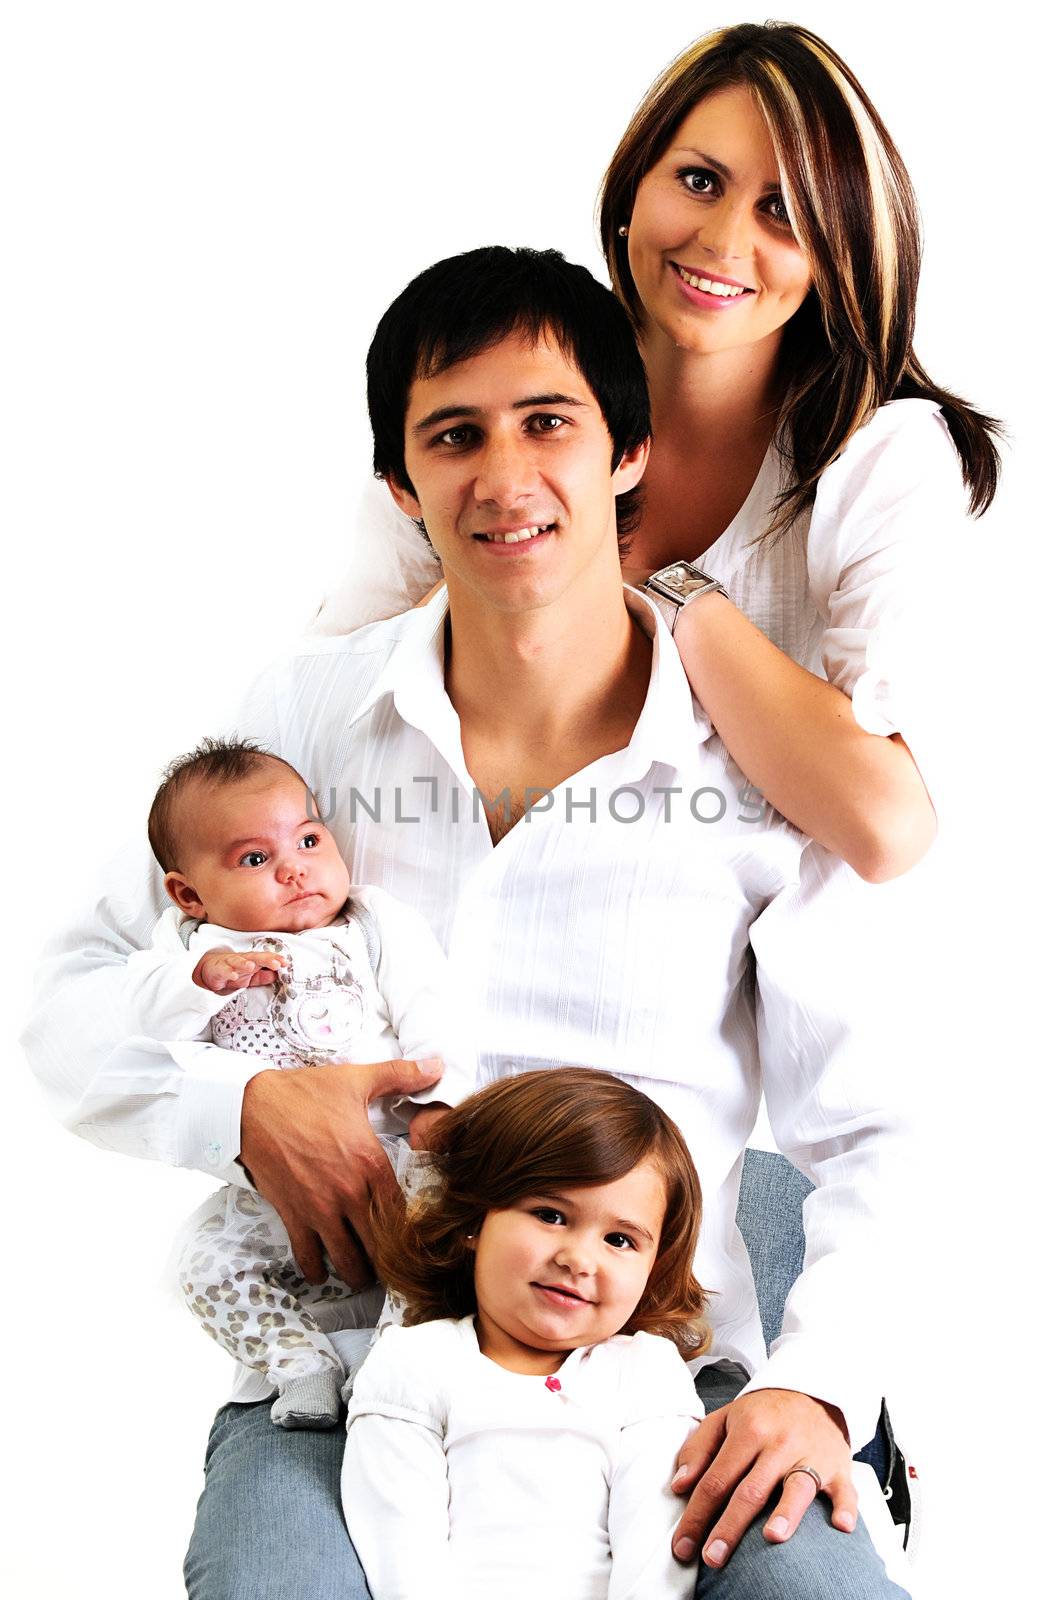 portrait of a young family with their newborn baby and daughter smiling